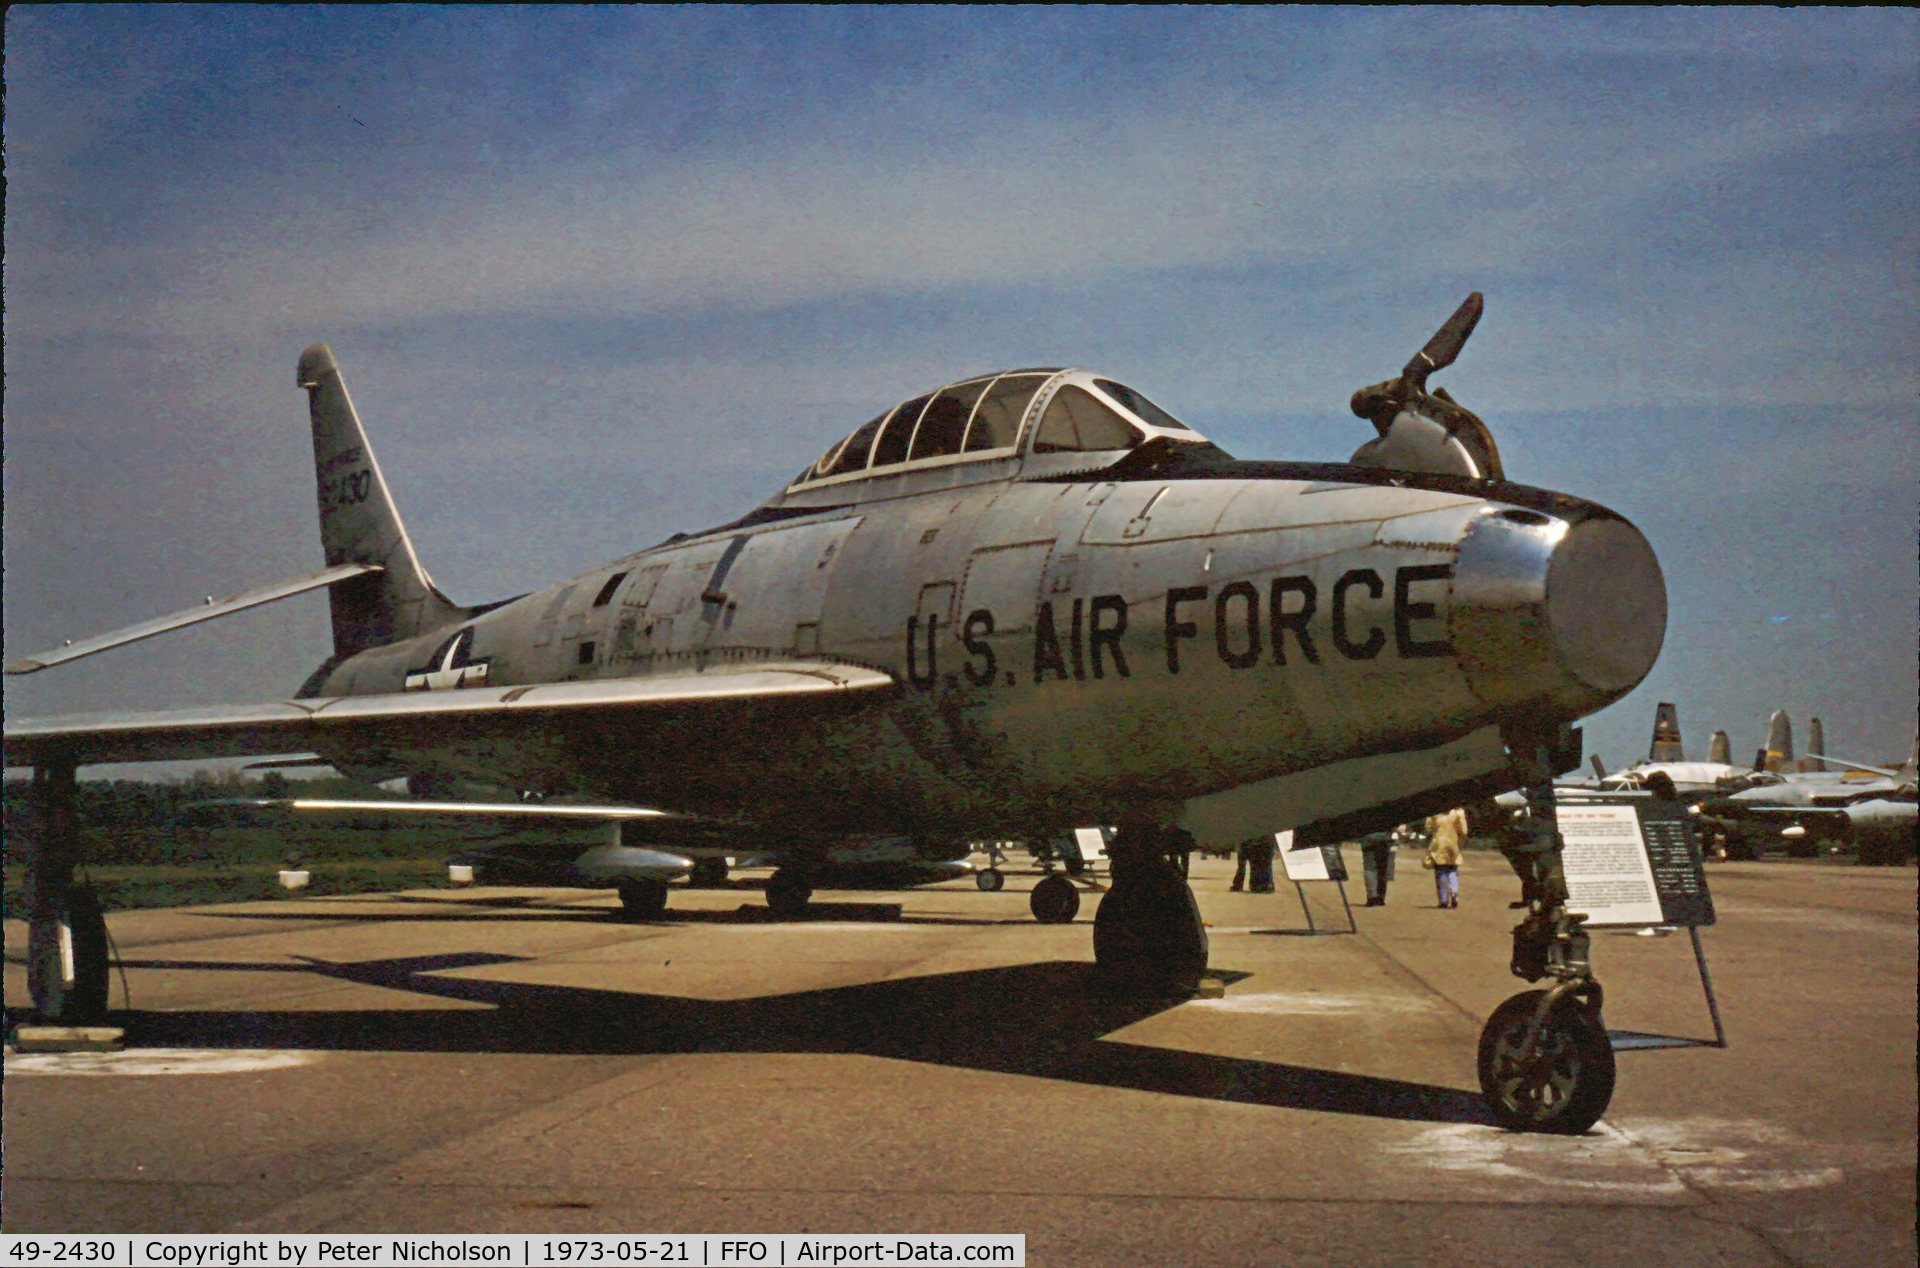 49-2430, 1950 Republic YRF-84F FICON C/N Not found 49-2430, As displayed in the summer of 1973.